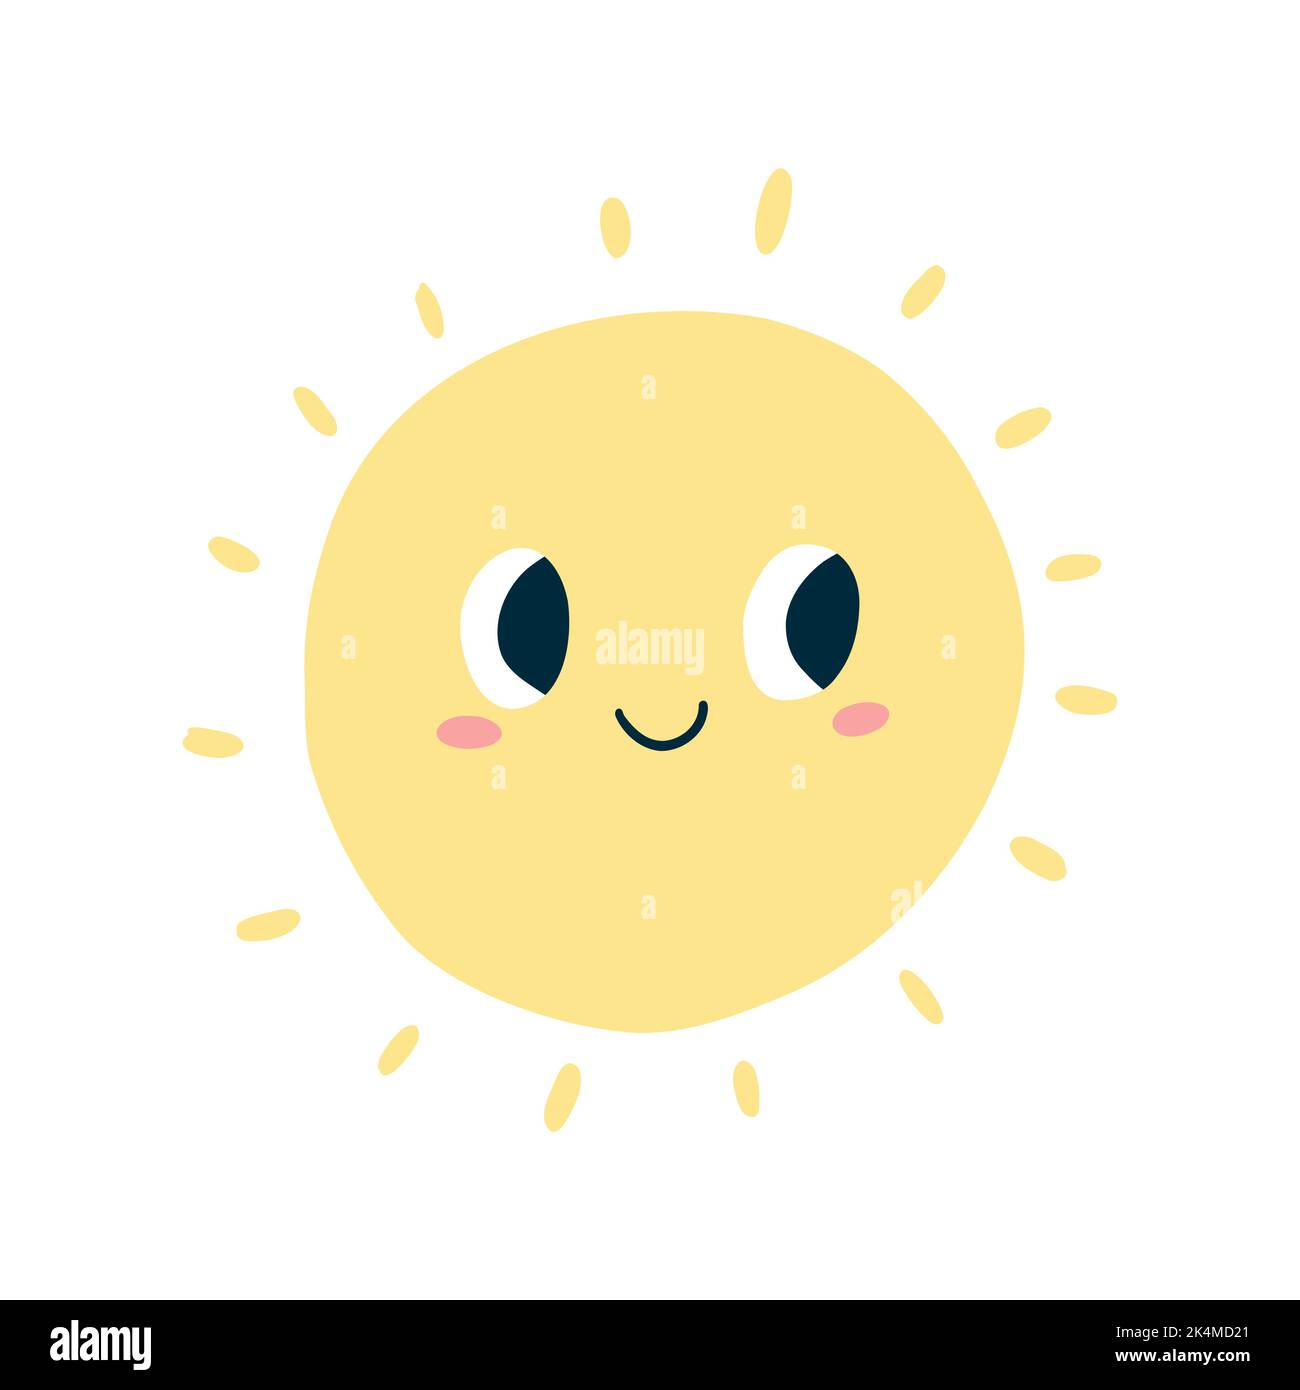 Cute kawaii sun in cartoon flat style. Vector illustration of kids sun icon with happy face for poster, fabric print, card, kids apparel. Stock Vector